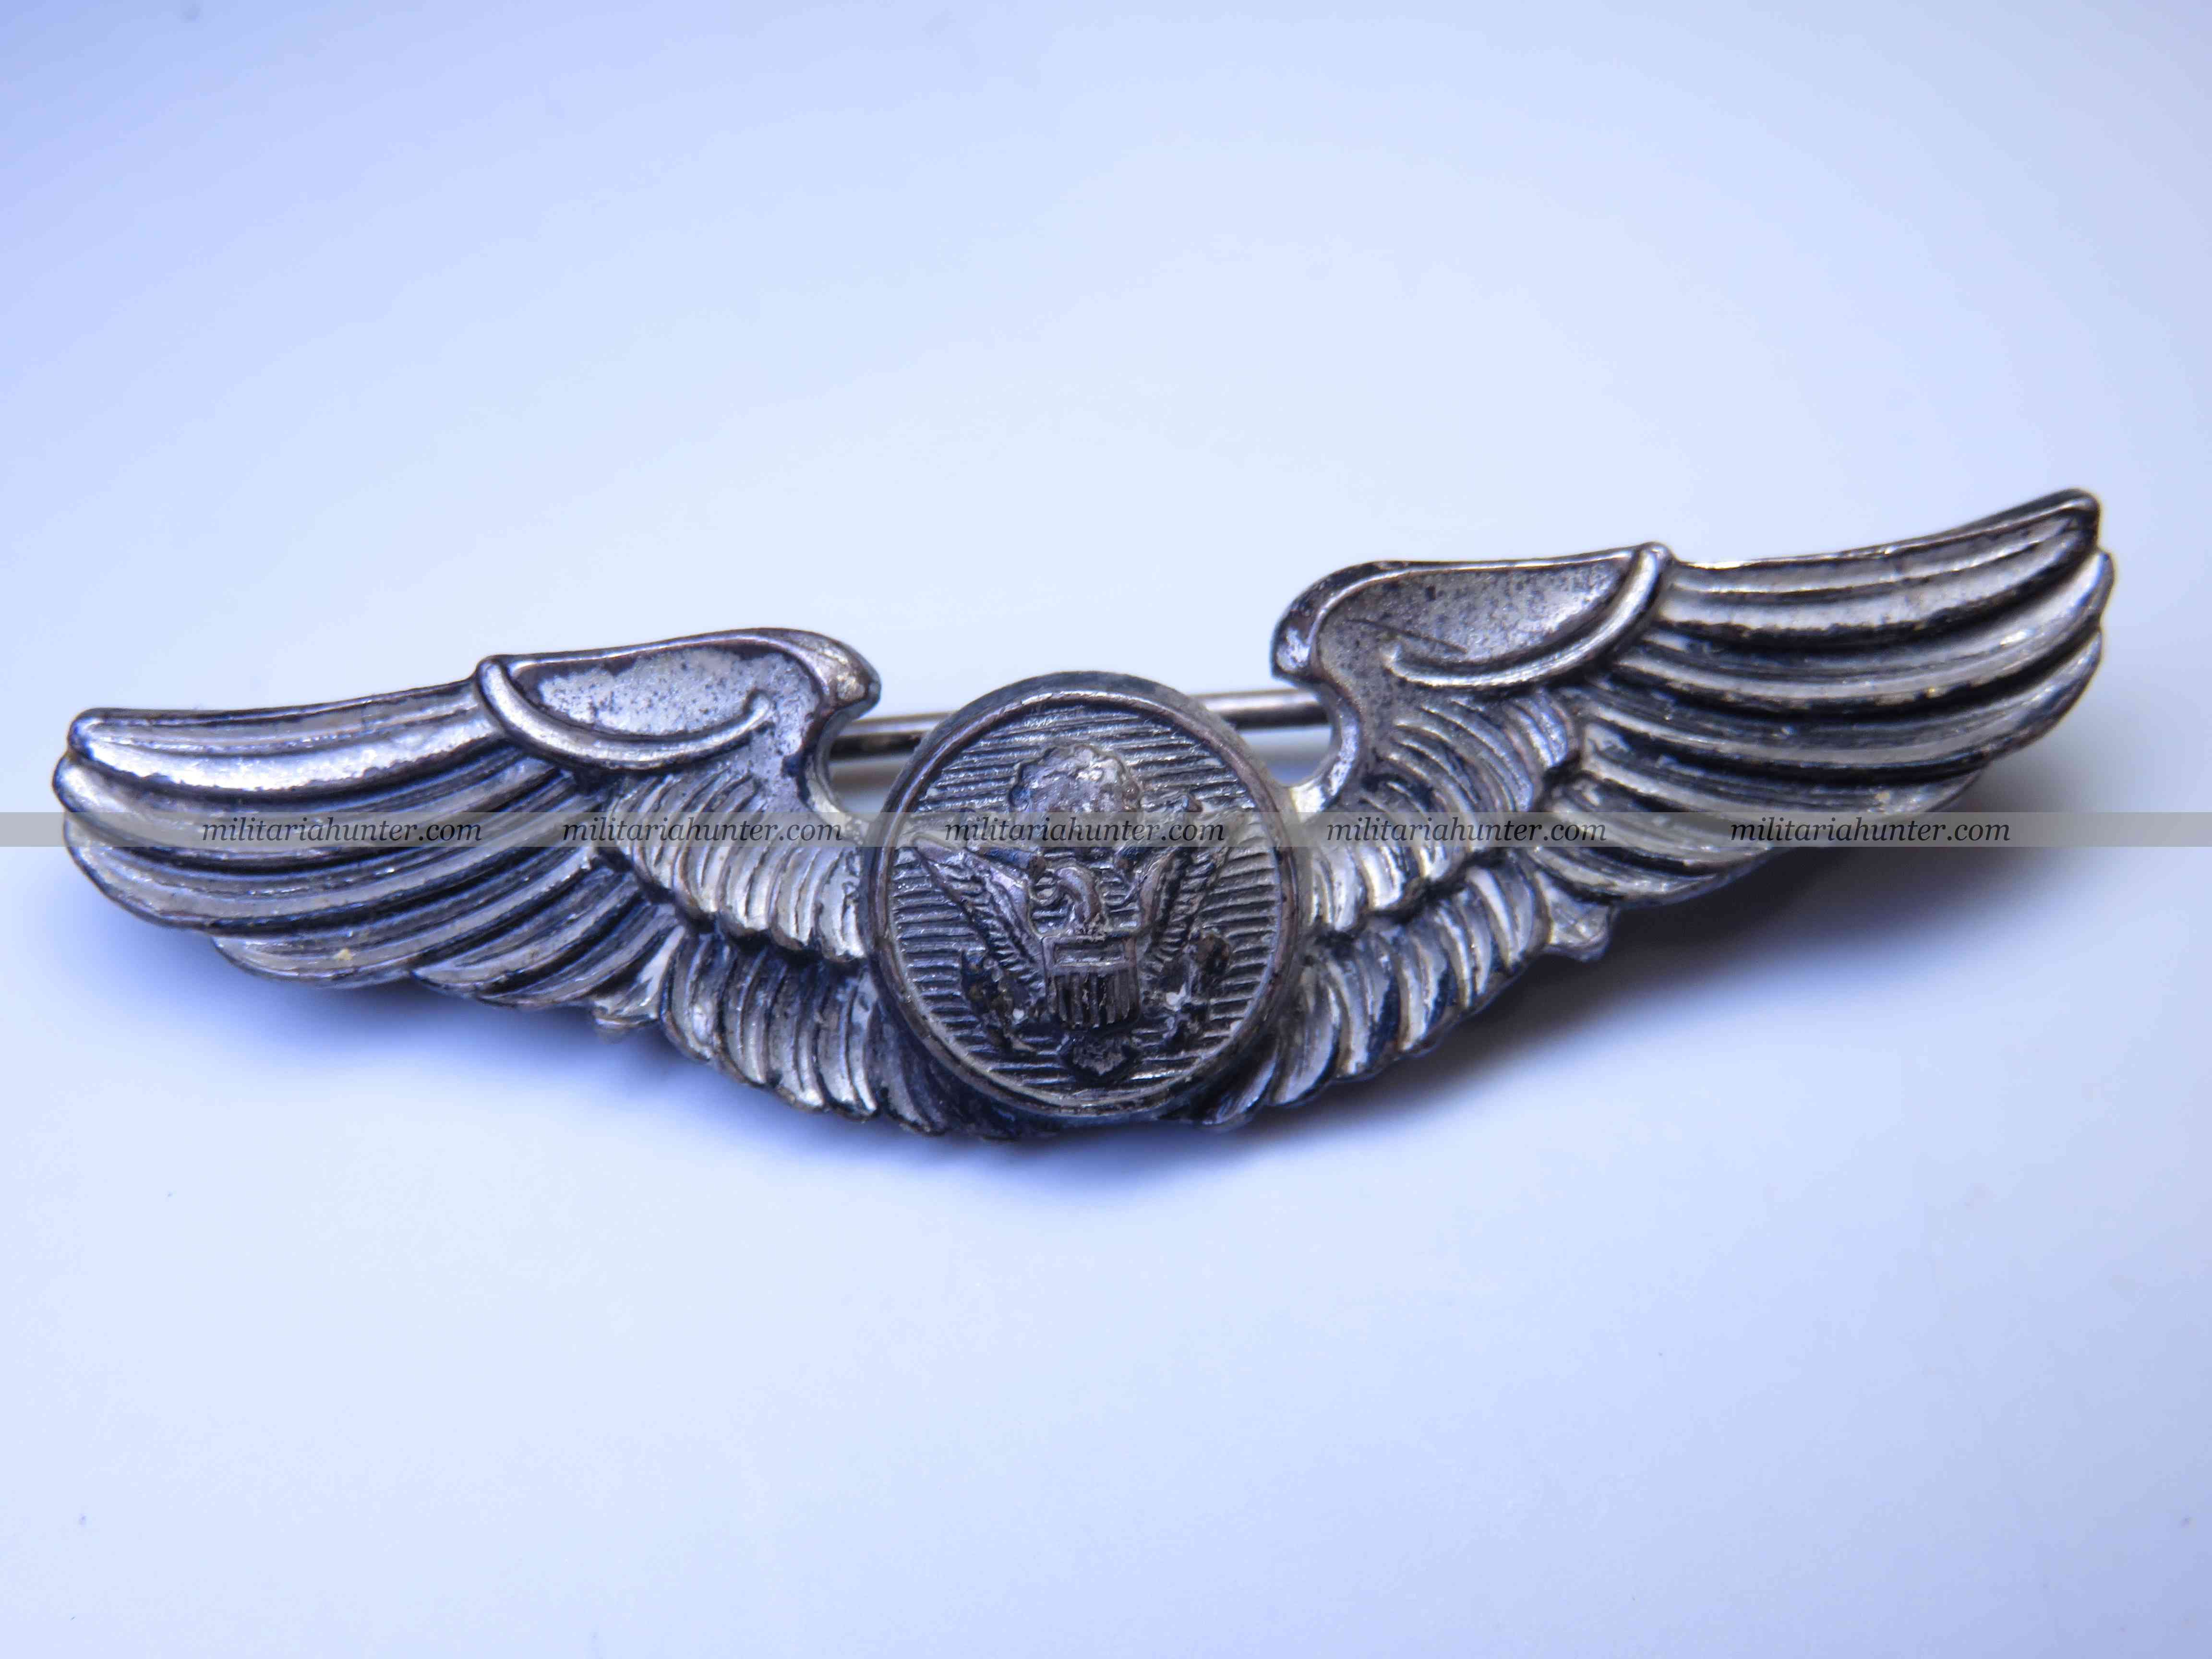 militaria : WW2 US air crew wings Sterling shirt size - membre d'équipage US Air Force